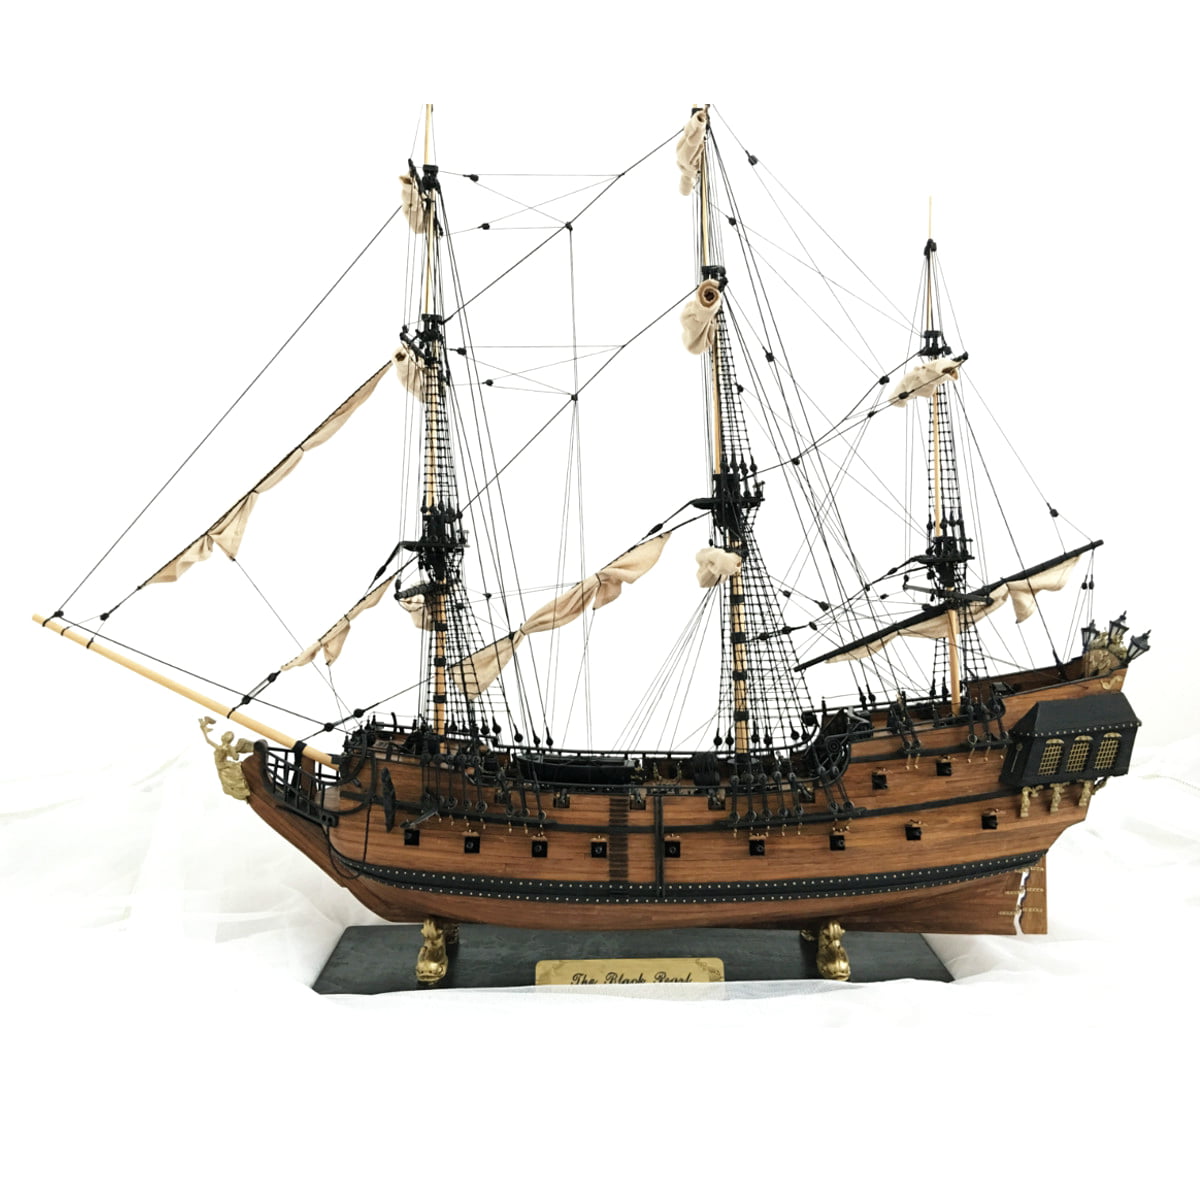 Joyshopping DIY Ship Assembly Model Kits Wooden Sailing Boat Scale Model Decoration Toys Gifts for Kids Adults